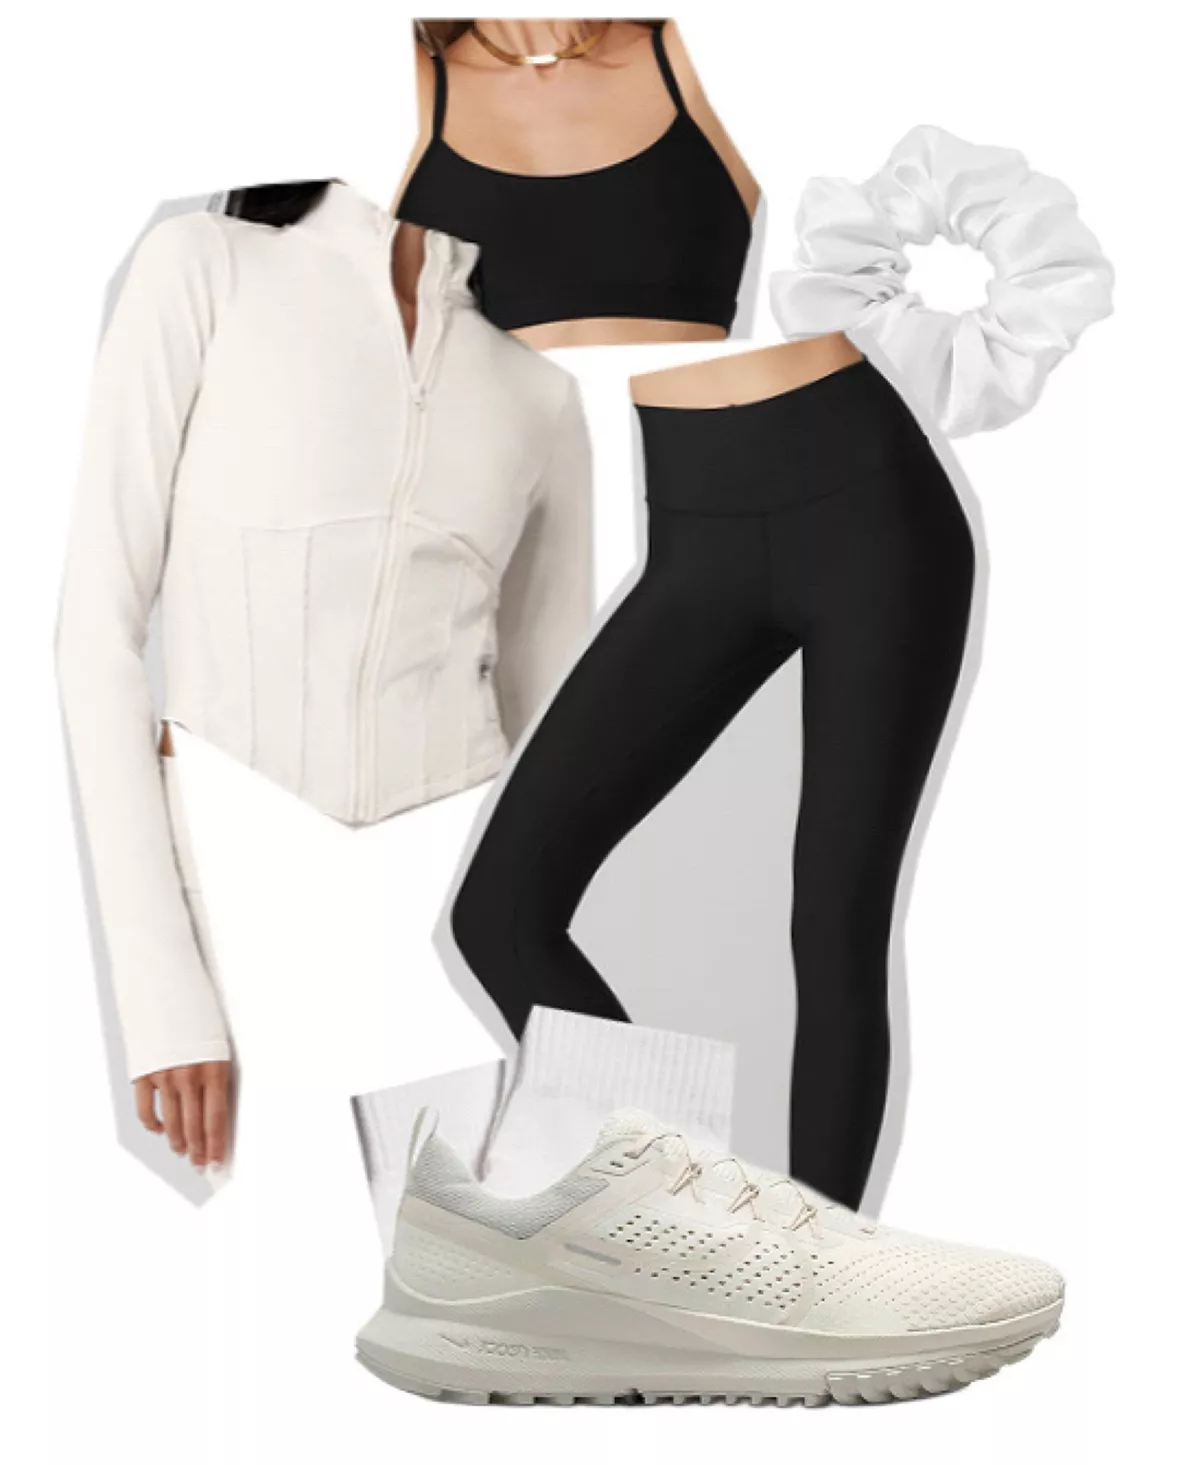 White Sneakers with Black Leggings Outfits (45 ideas & outfits